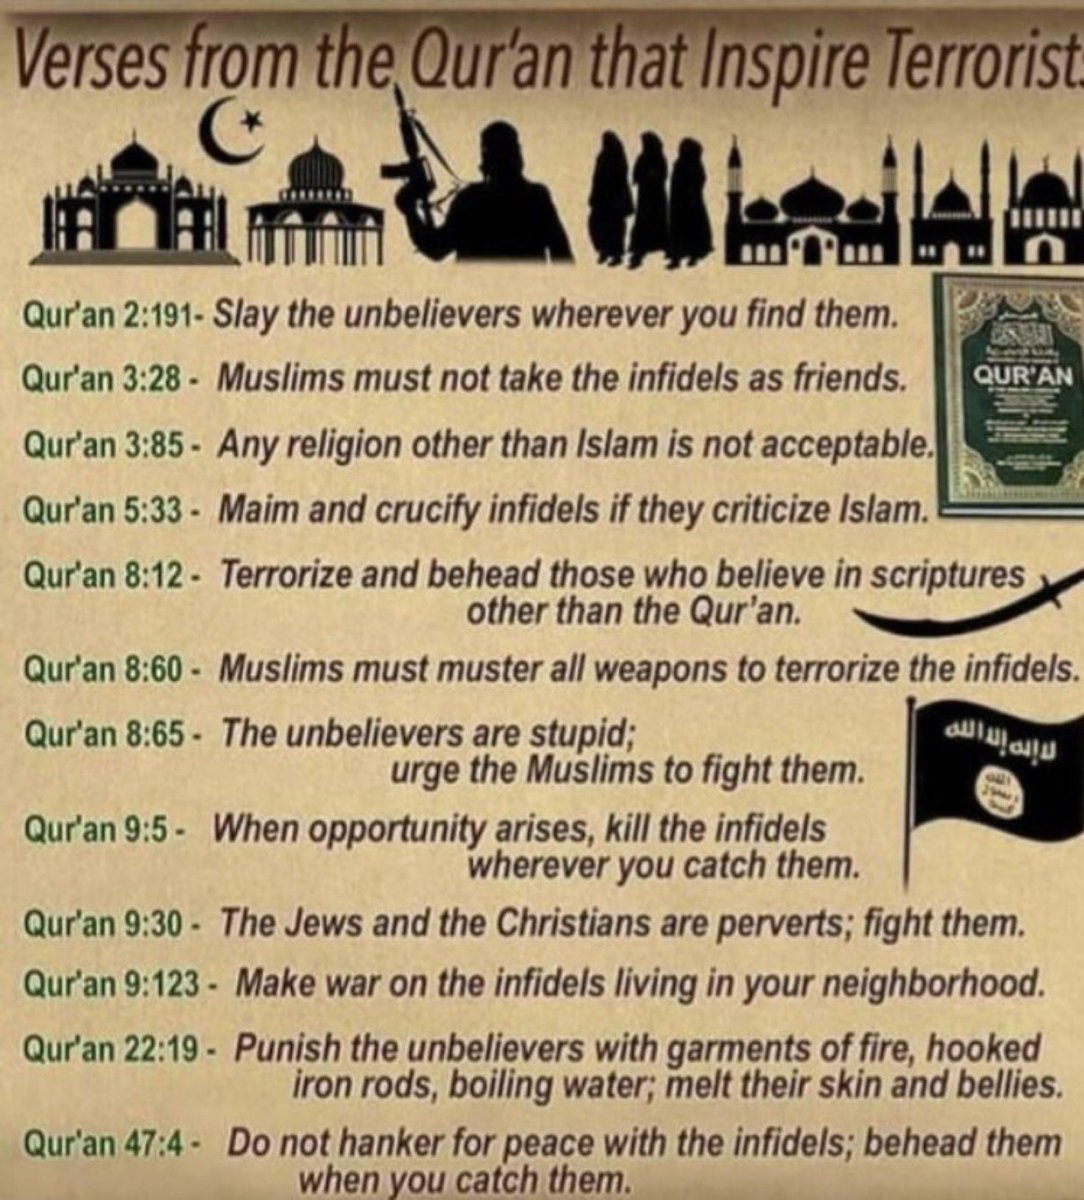 @nsxano @BanIslam__UK What white washed book have you been reading . Excerpts from the real green book.